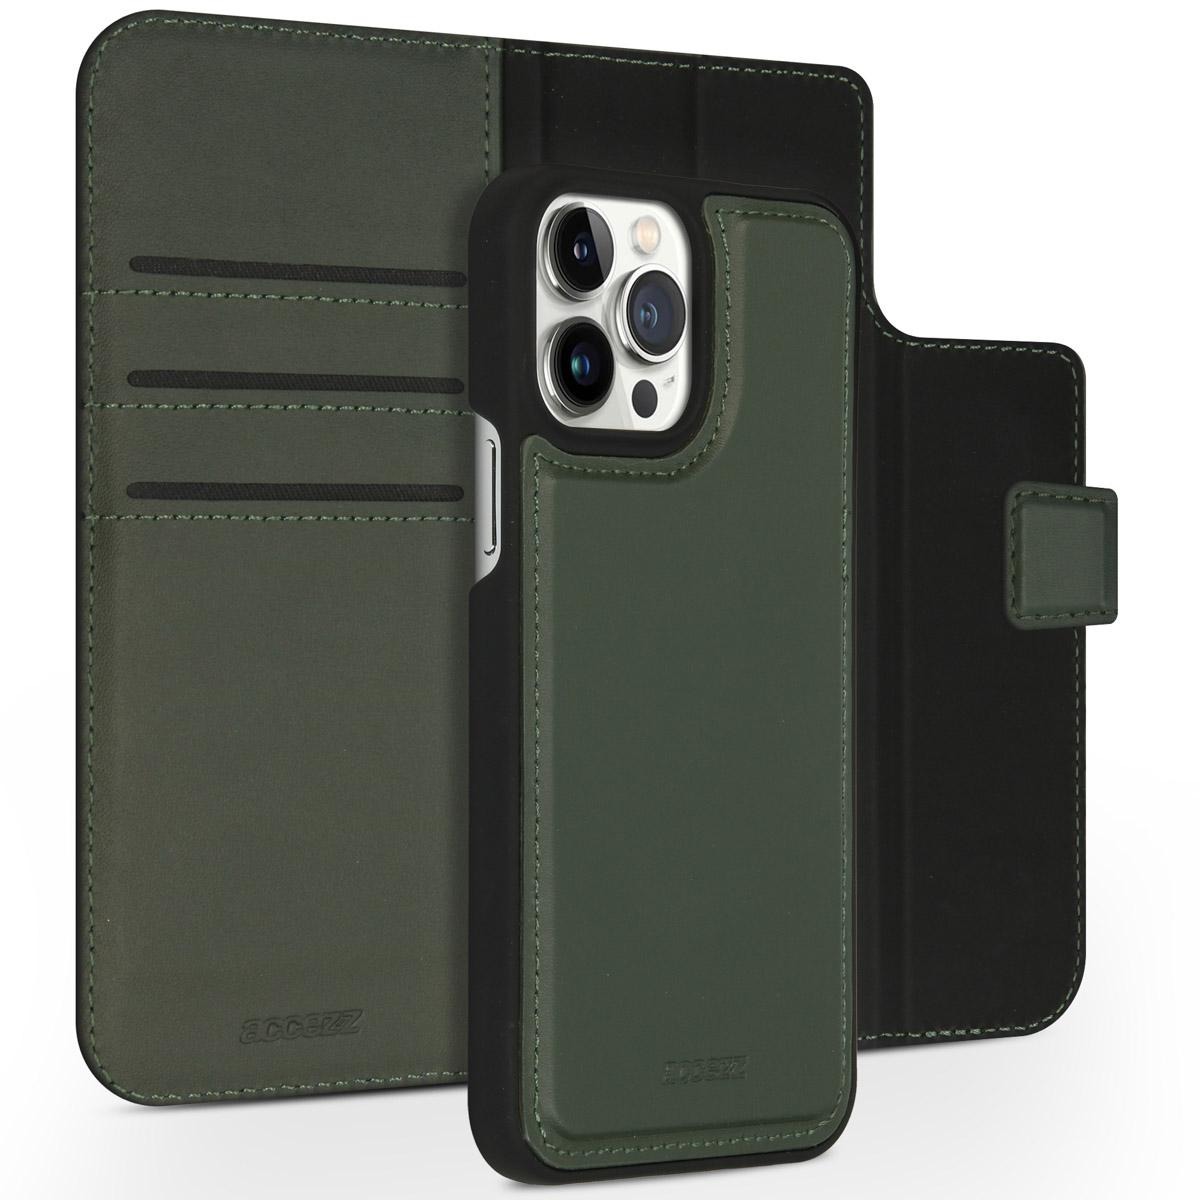 Accezz Premium Leather 2 in 1 Wallet Book Case iPhone 13 Pro Max hoesje - Groen